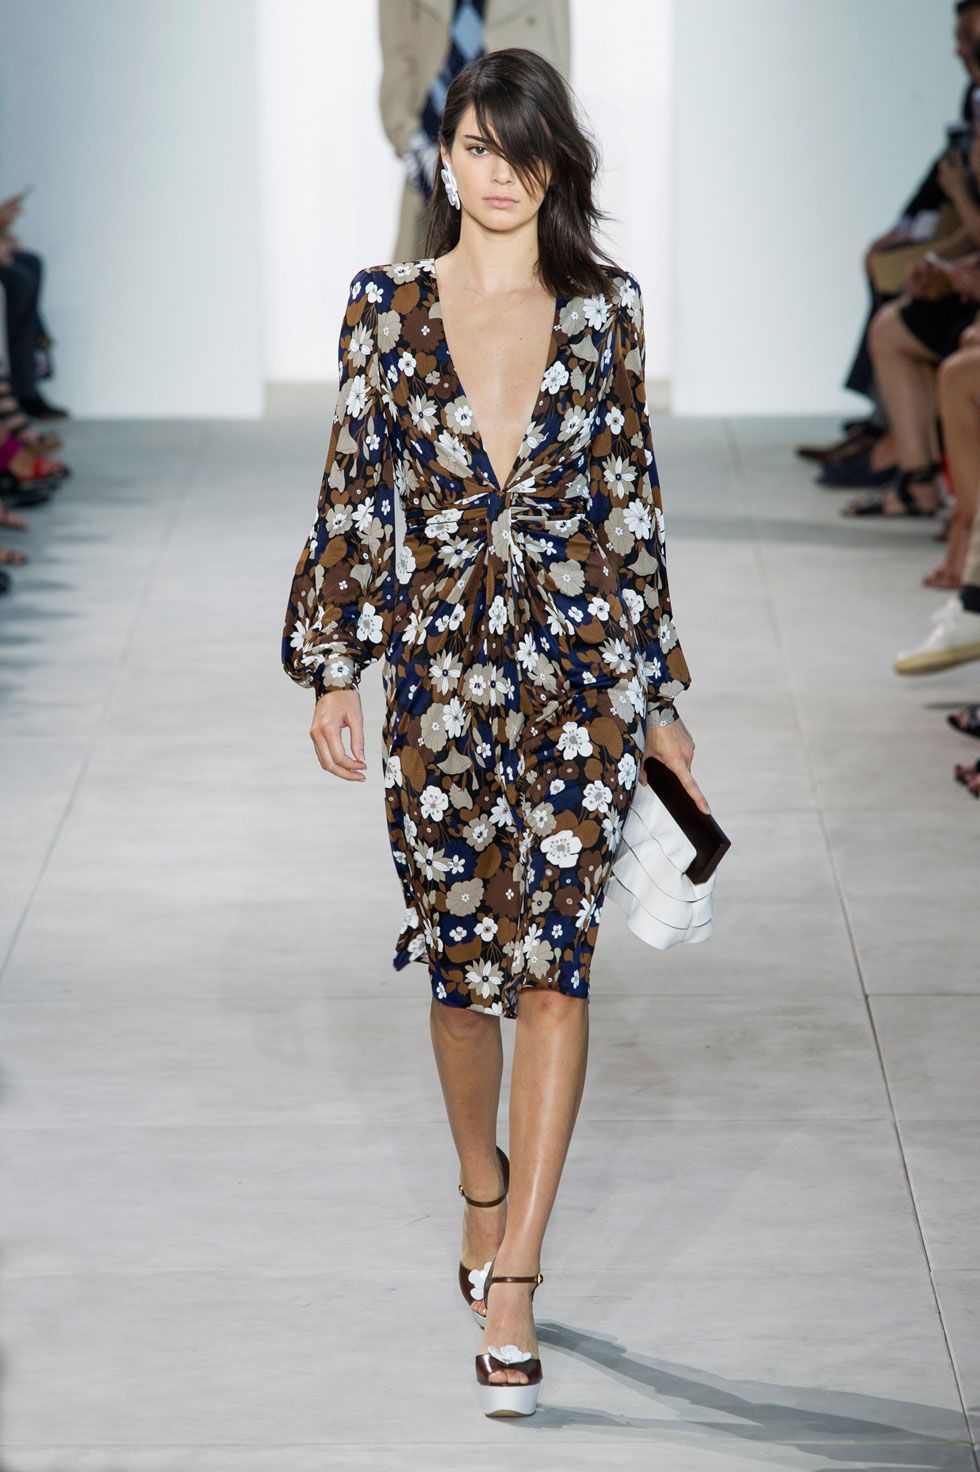 56 Looks From the Michael Kors Spring 